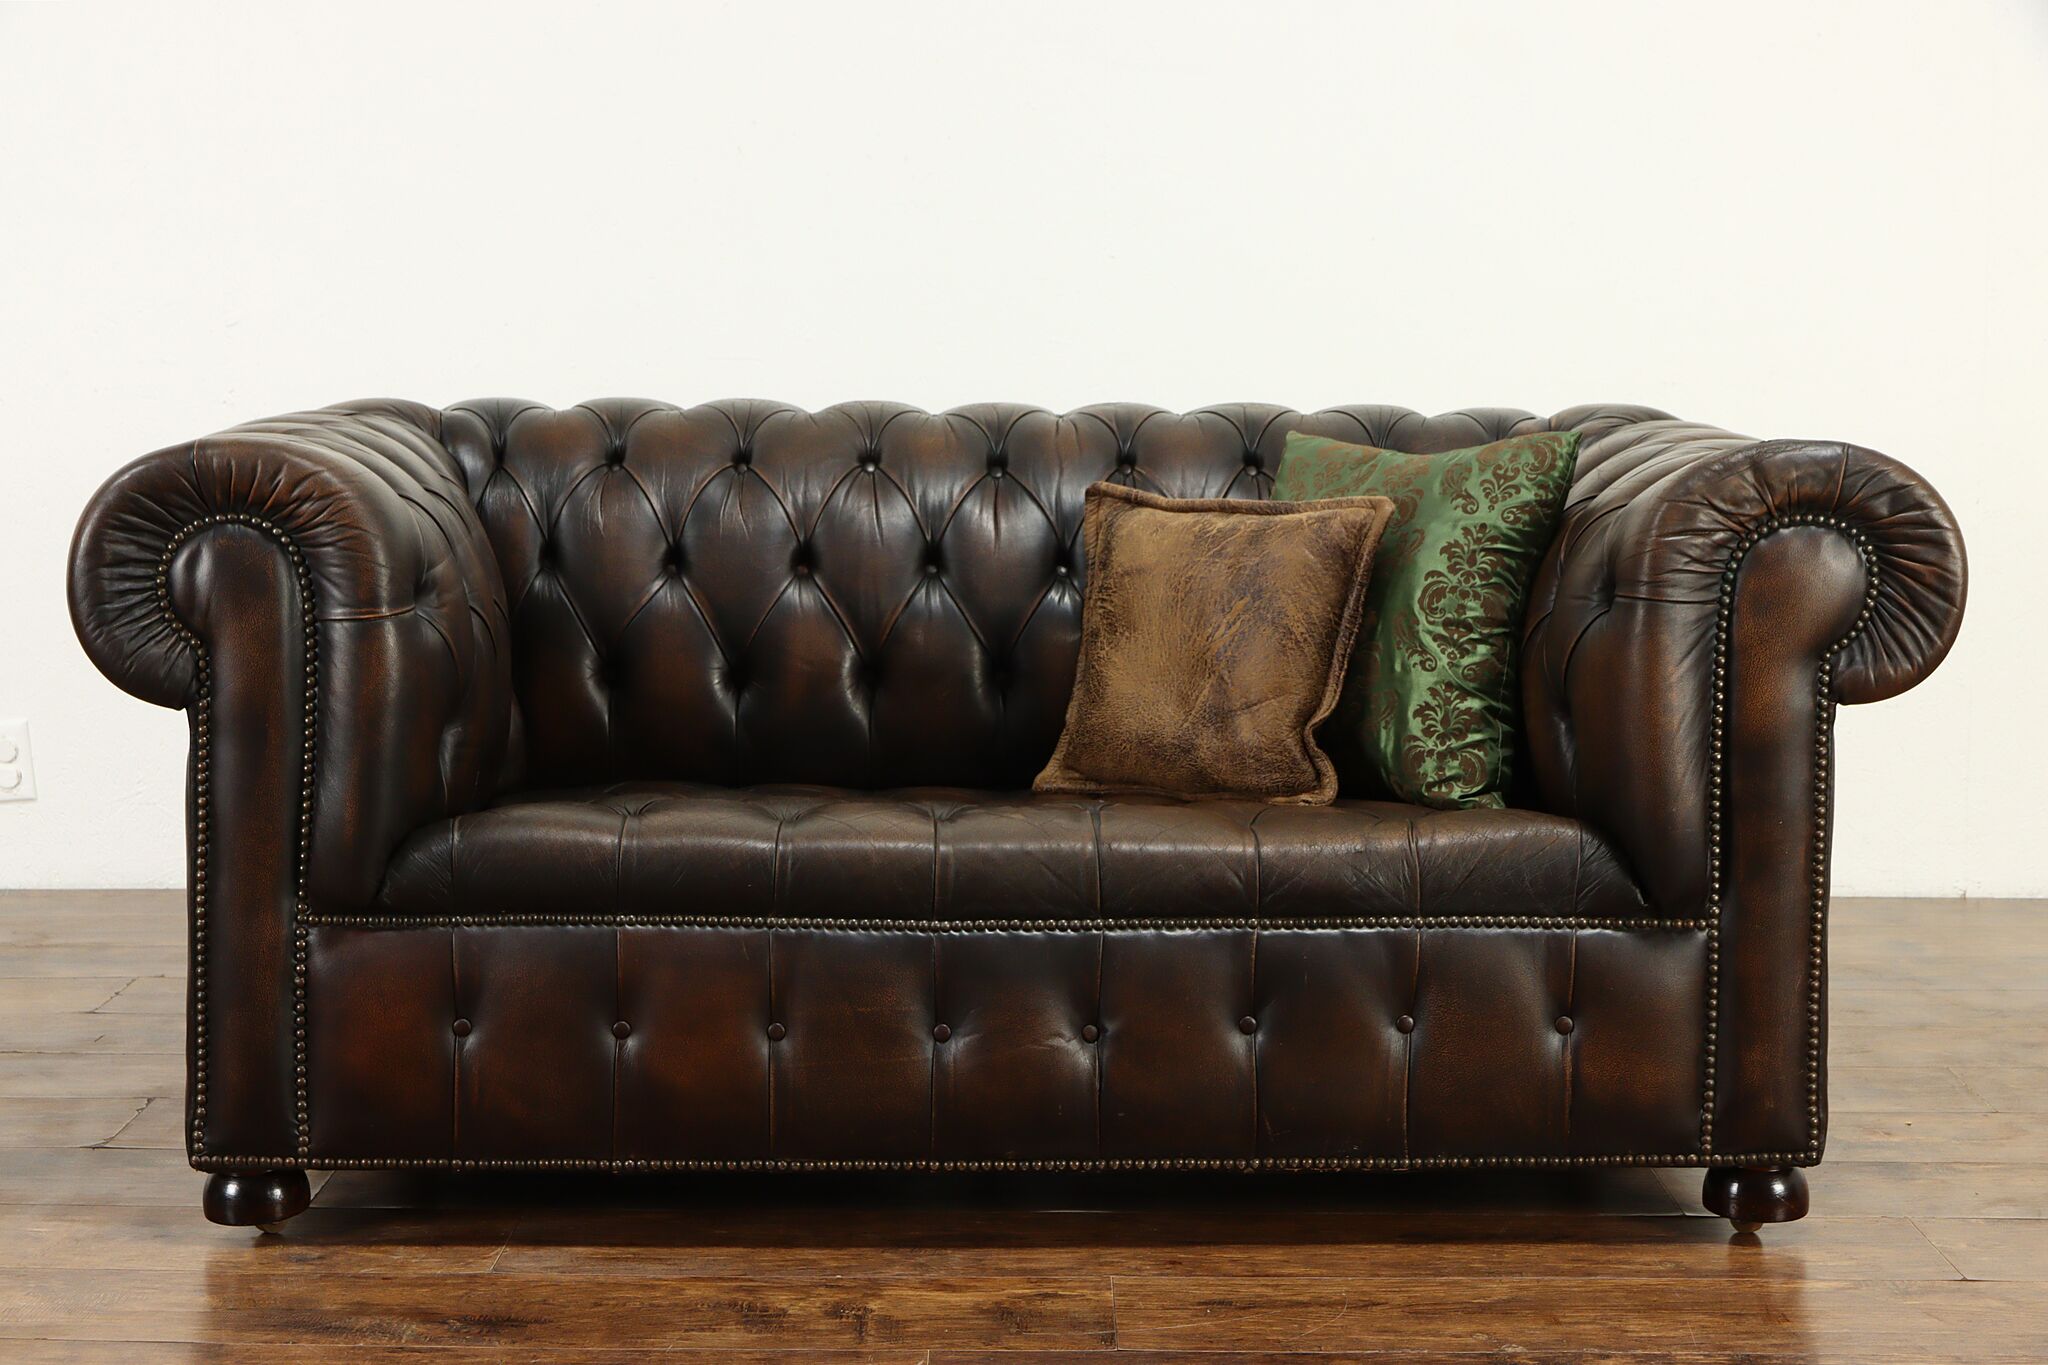 Tufted Leather Vintage Chesterfield, Chesterfield Leather Loveseat